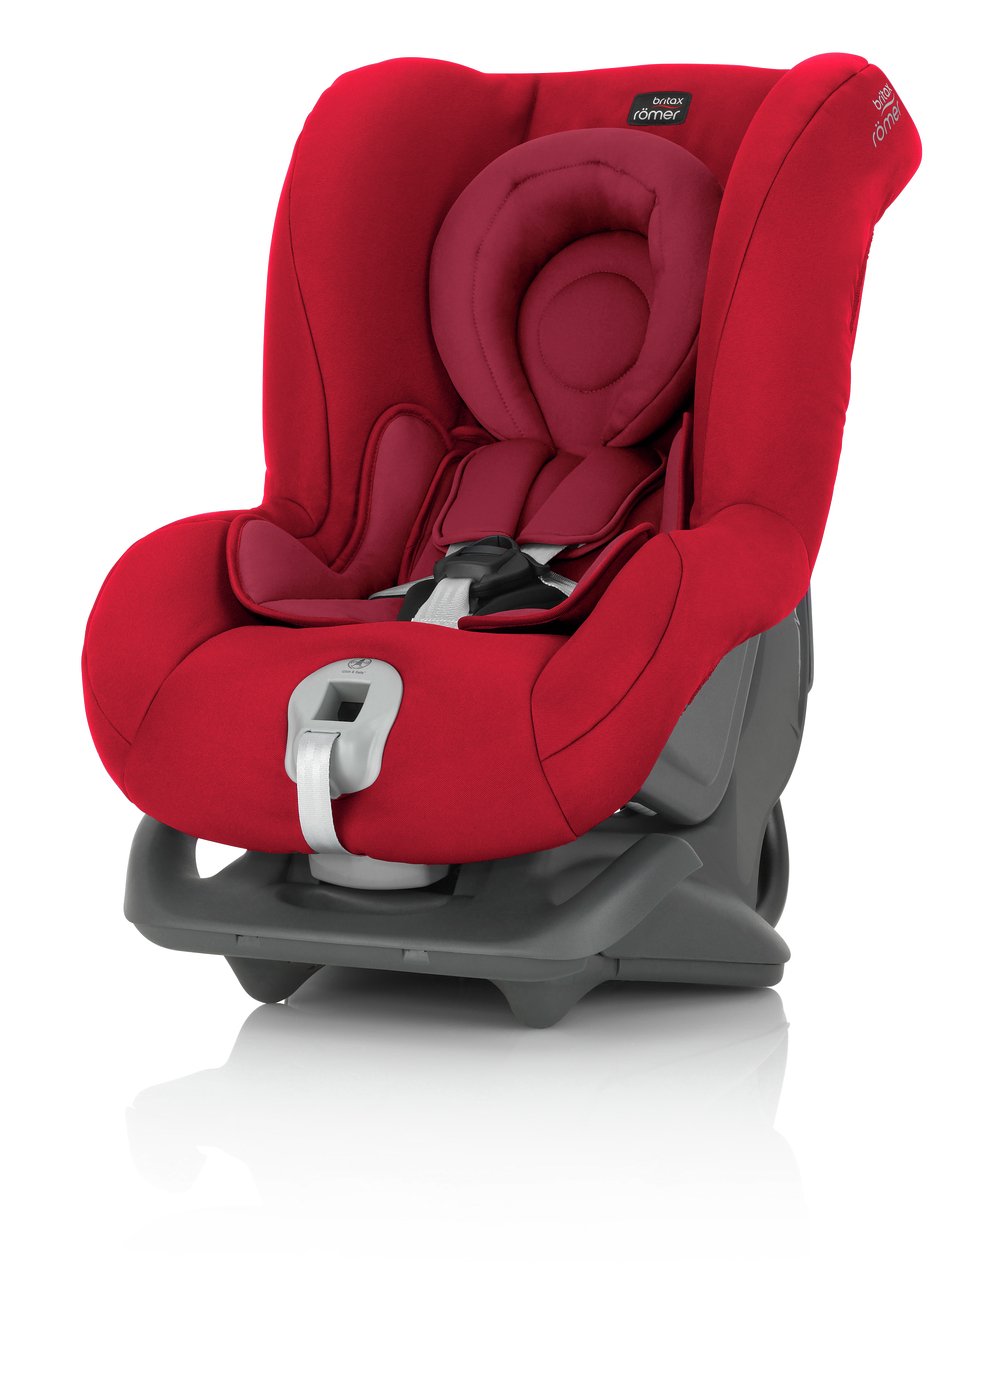 Britax Romer FIRST CLASS PLUS Group 0+/1 Car Seat- Flame Red